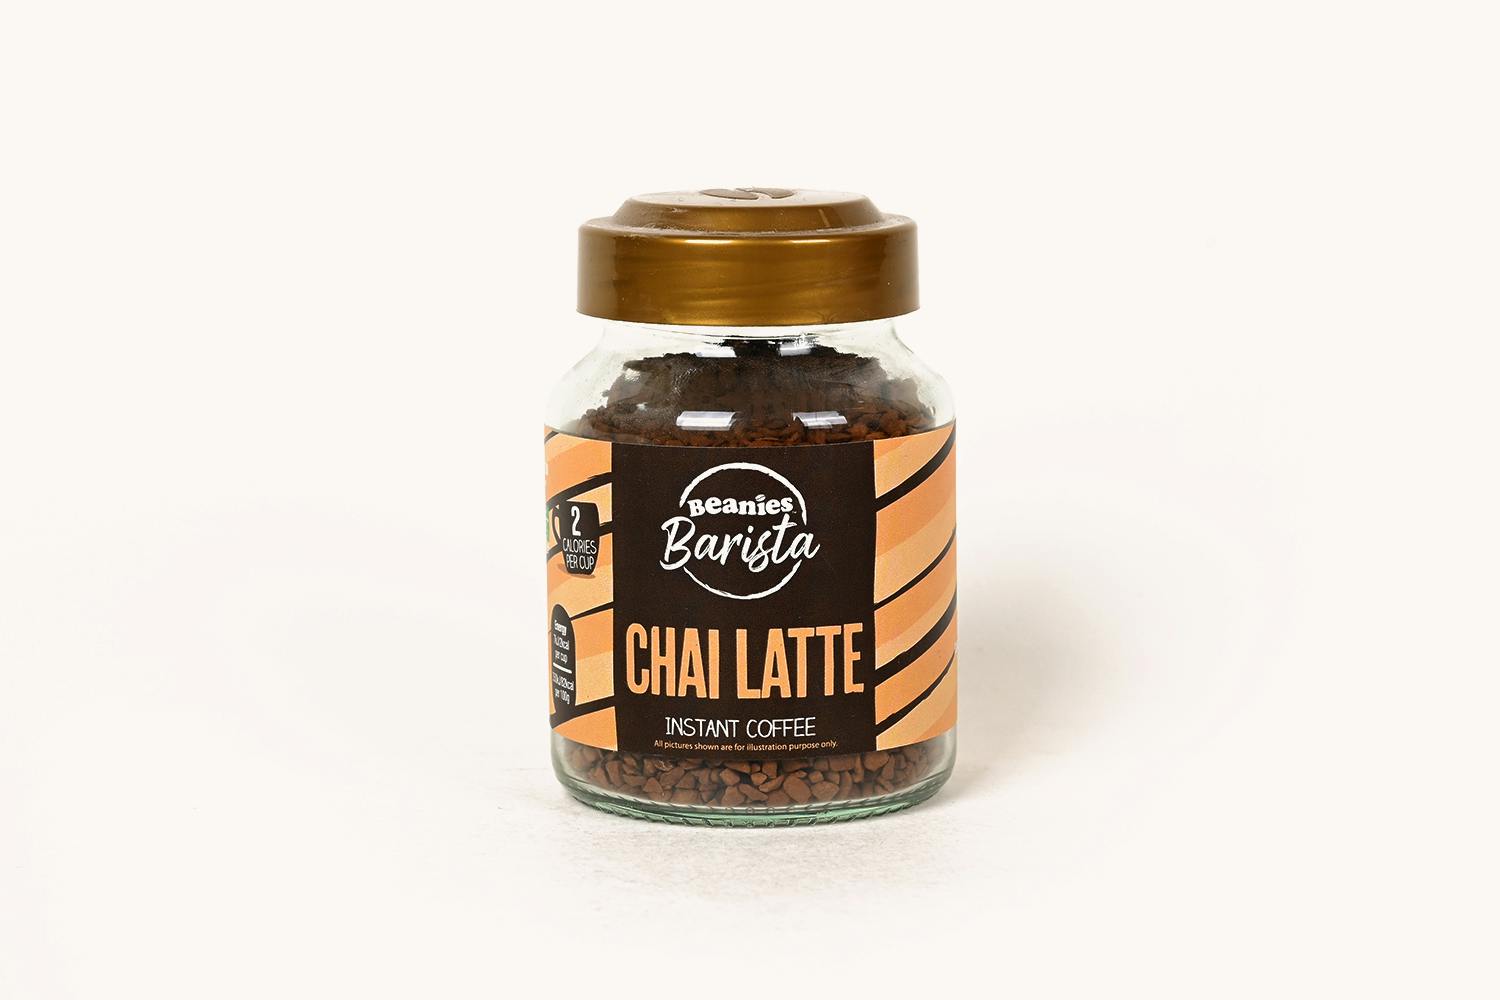 Beanies Instant Coffee - Chai Latte Flavour